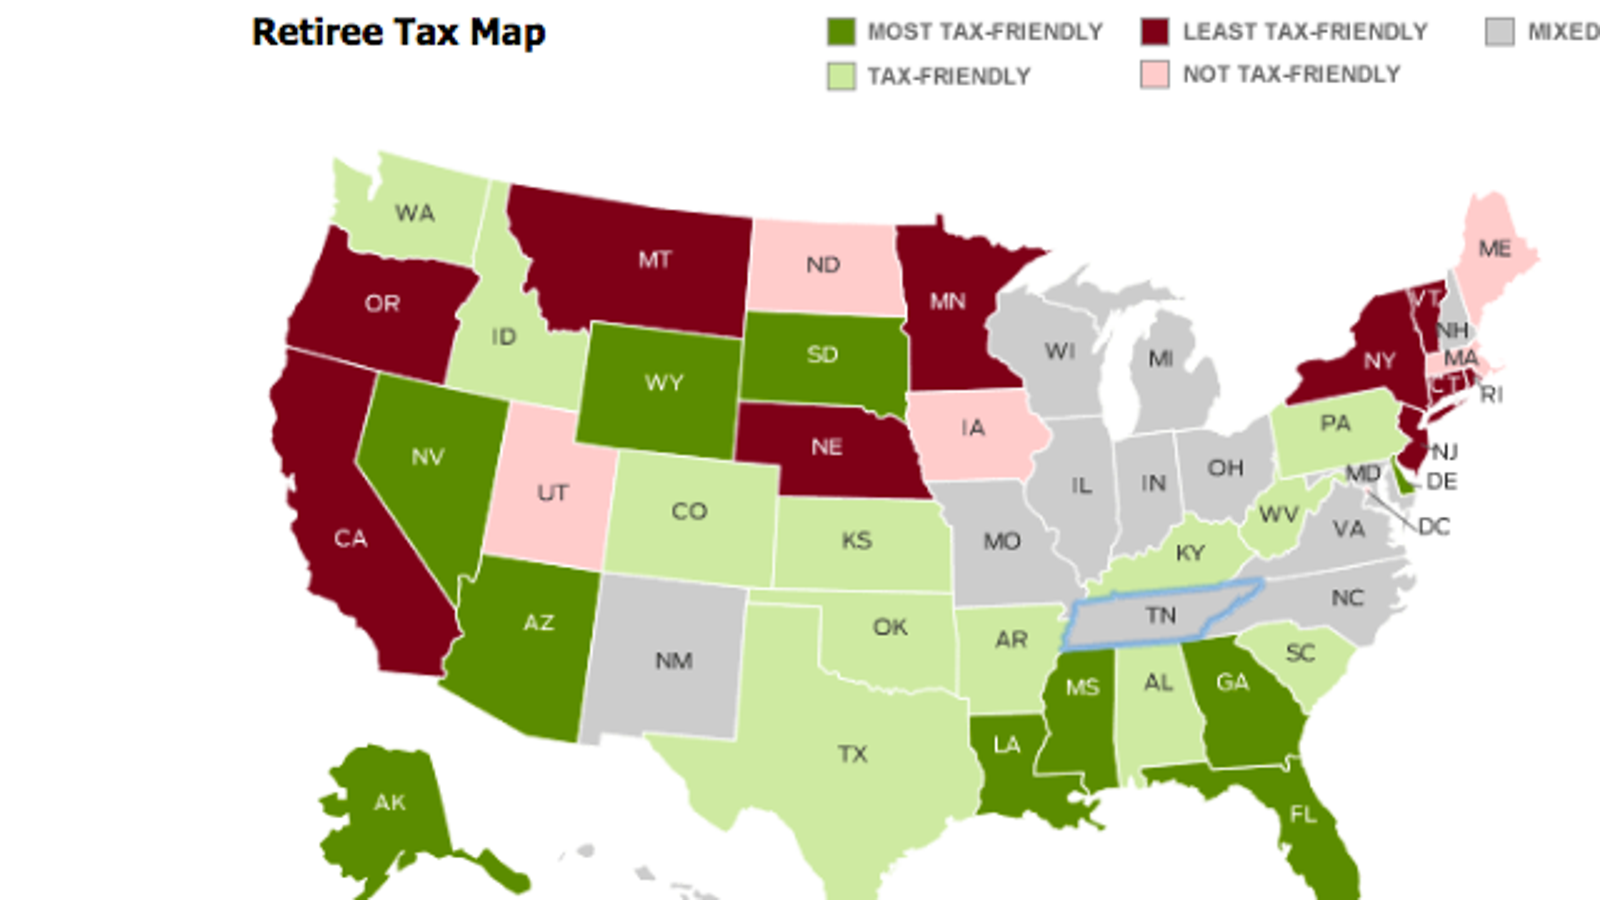 The Most TaxFriendly States for Retirement